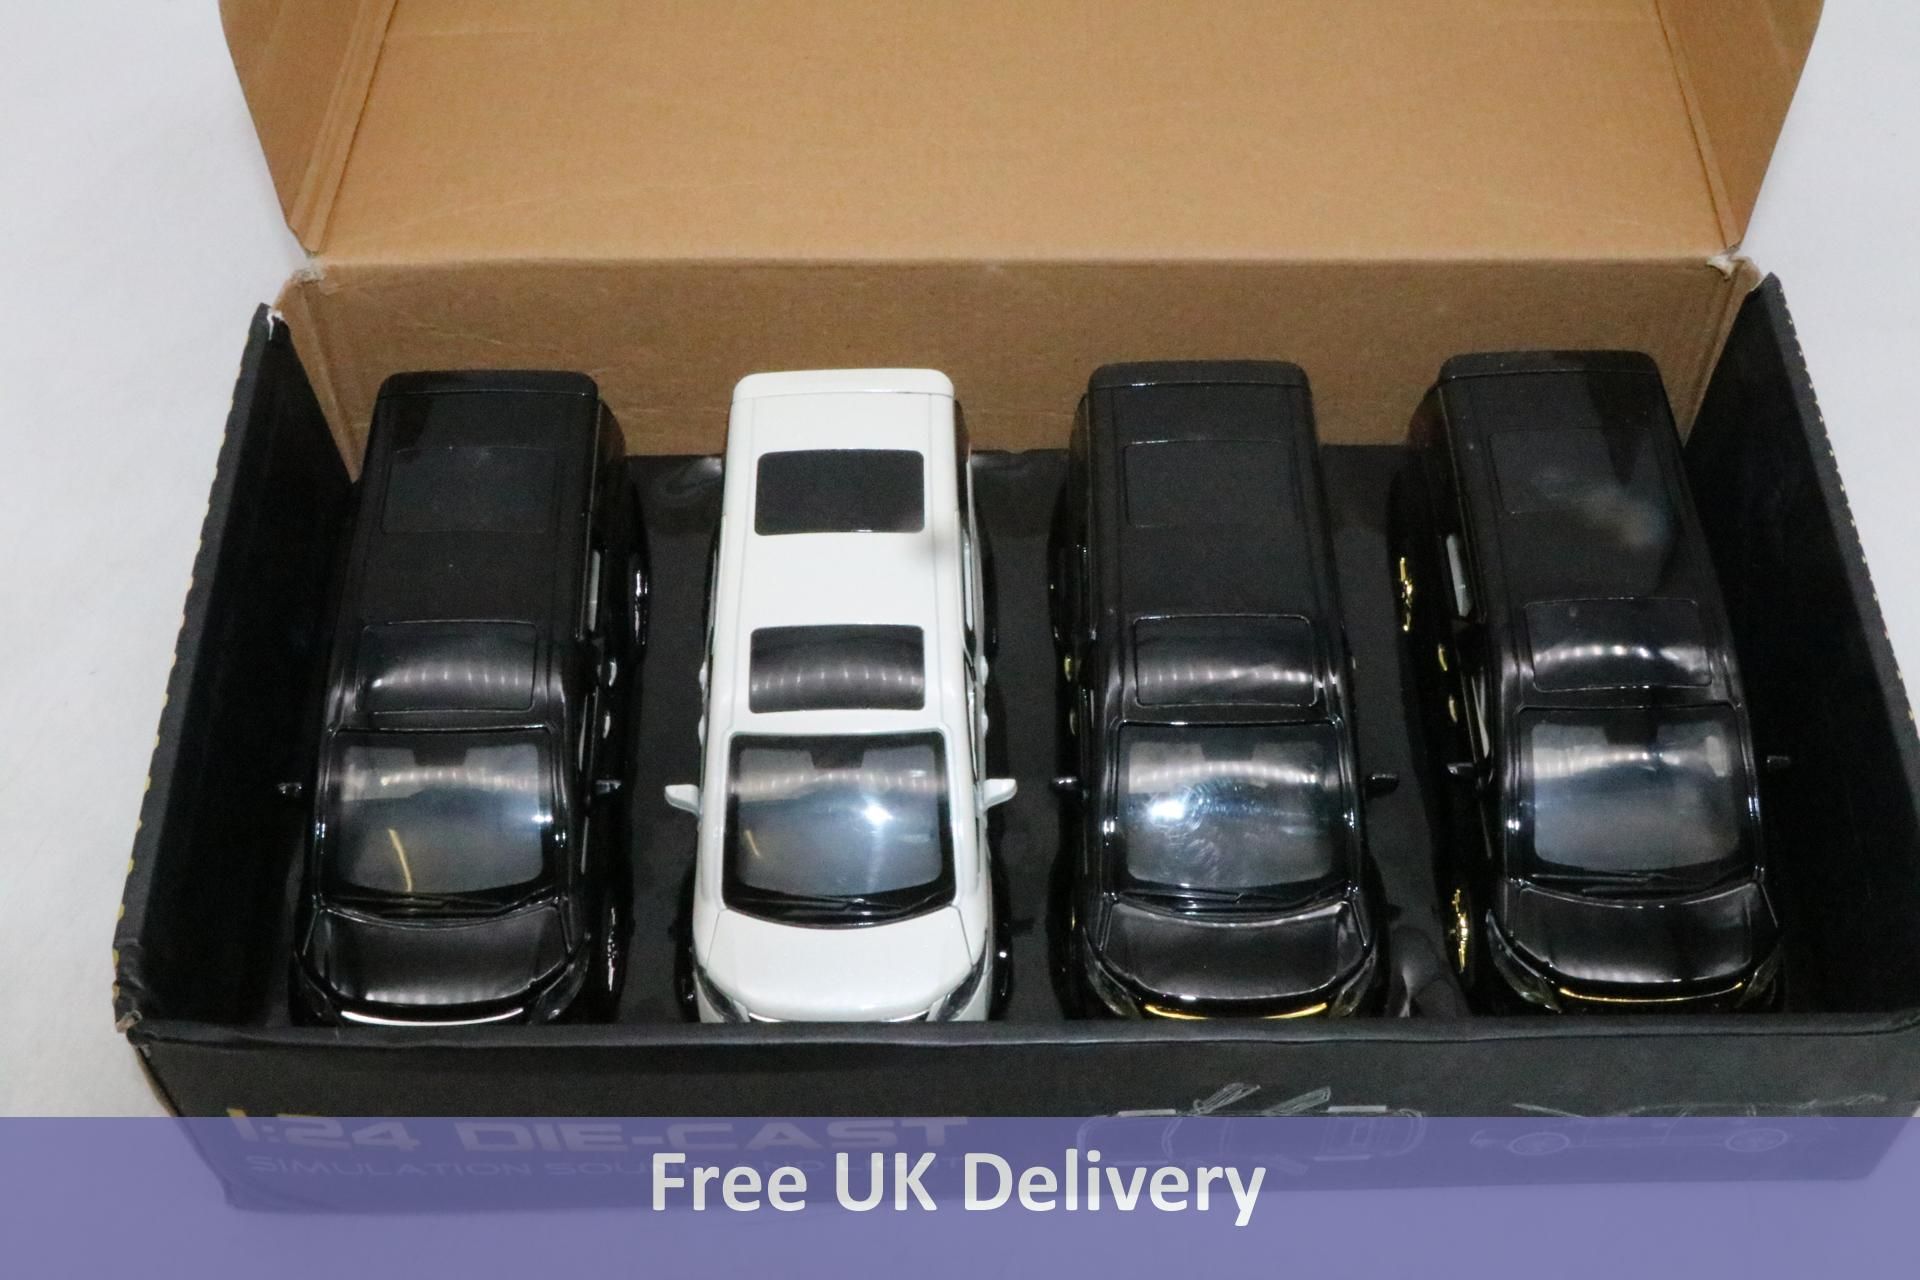 XLG Lexus M929M Pullback Power Series, Four Cars 1 White, 3 Black, Battery Operated, Age 3+. Box dam